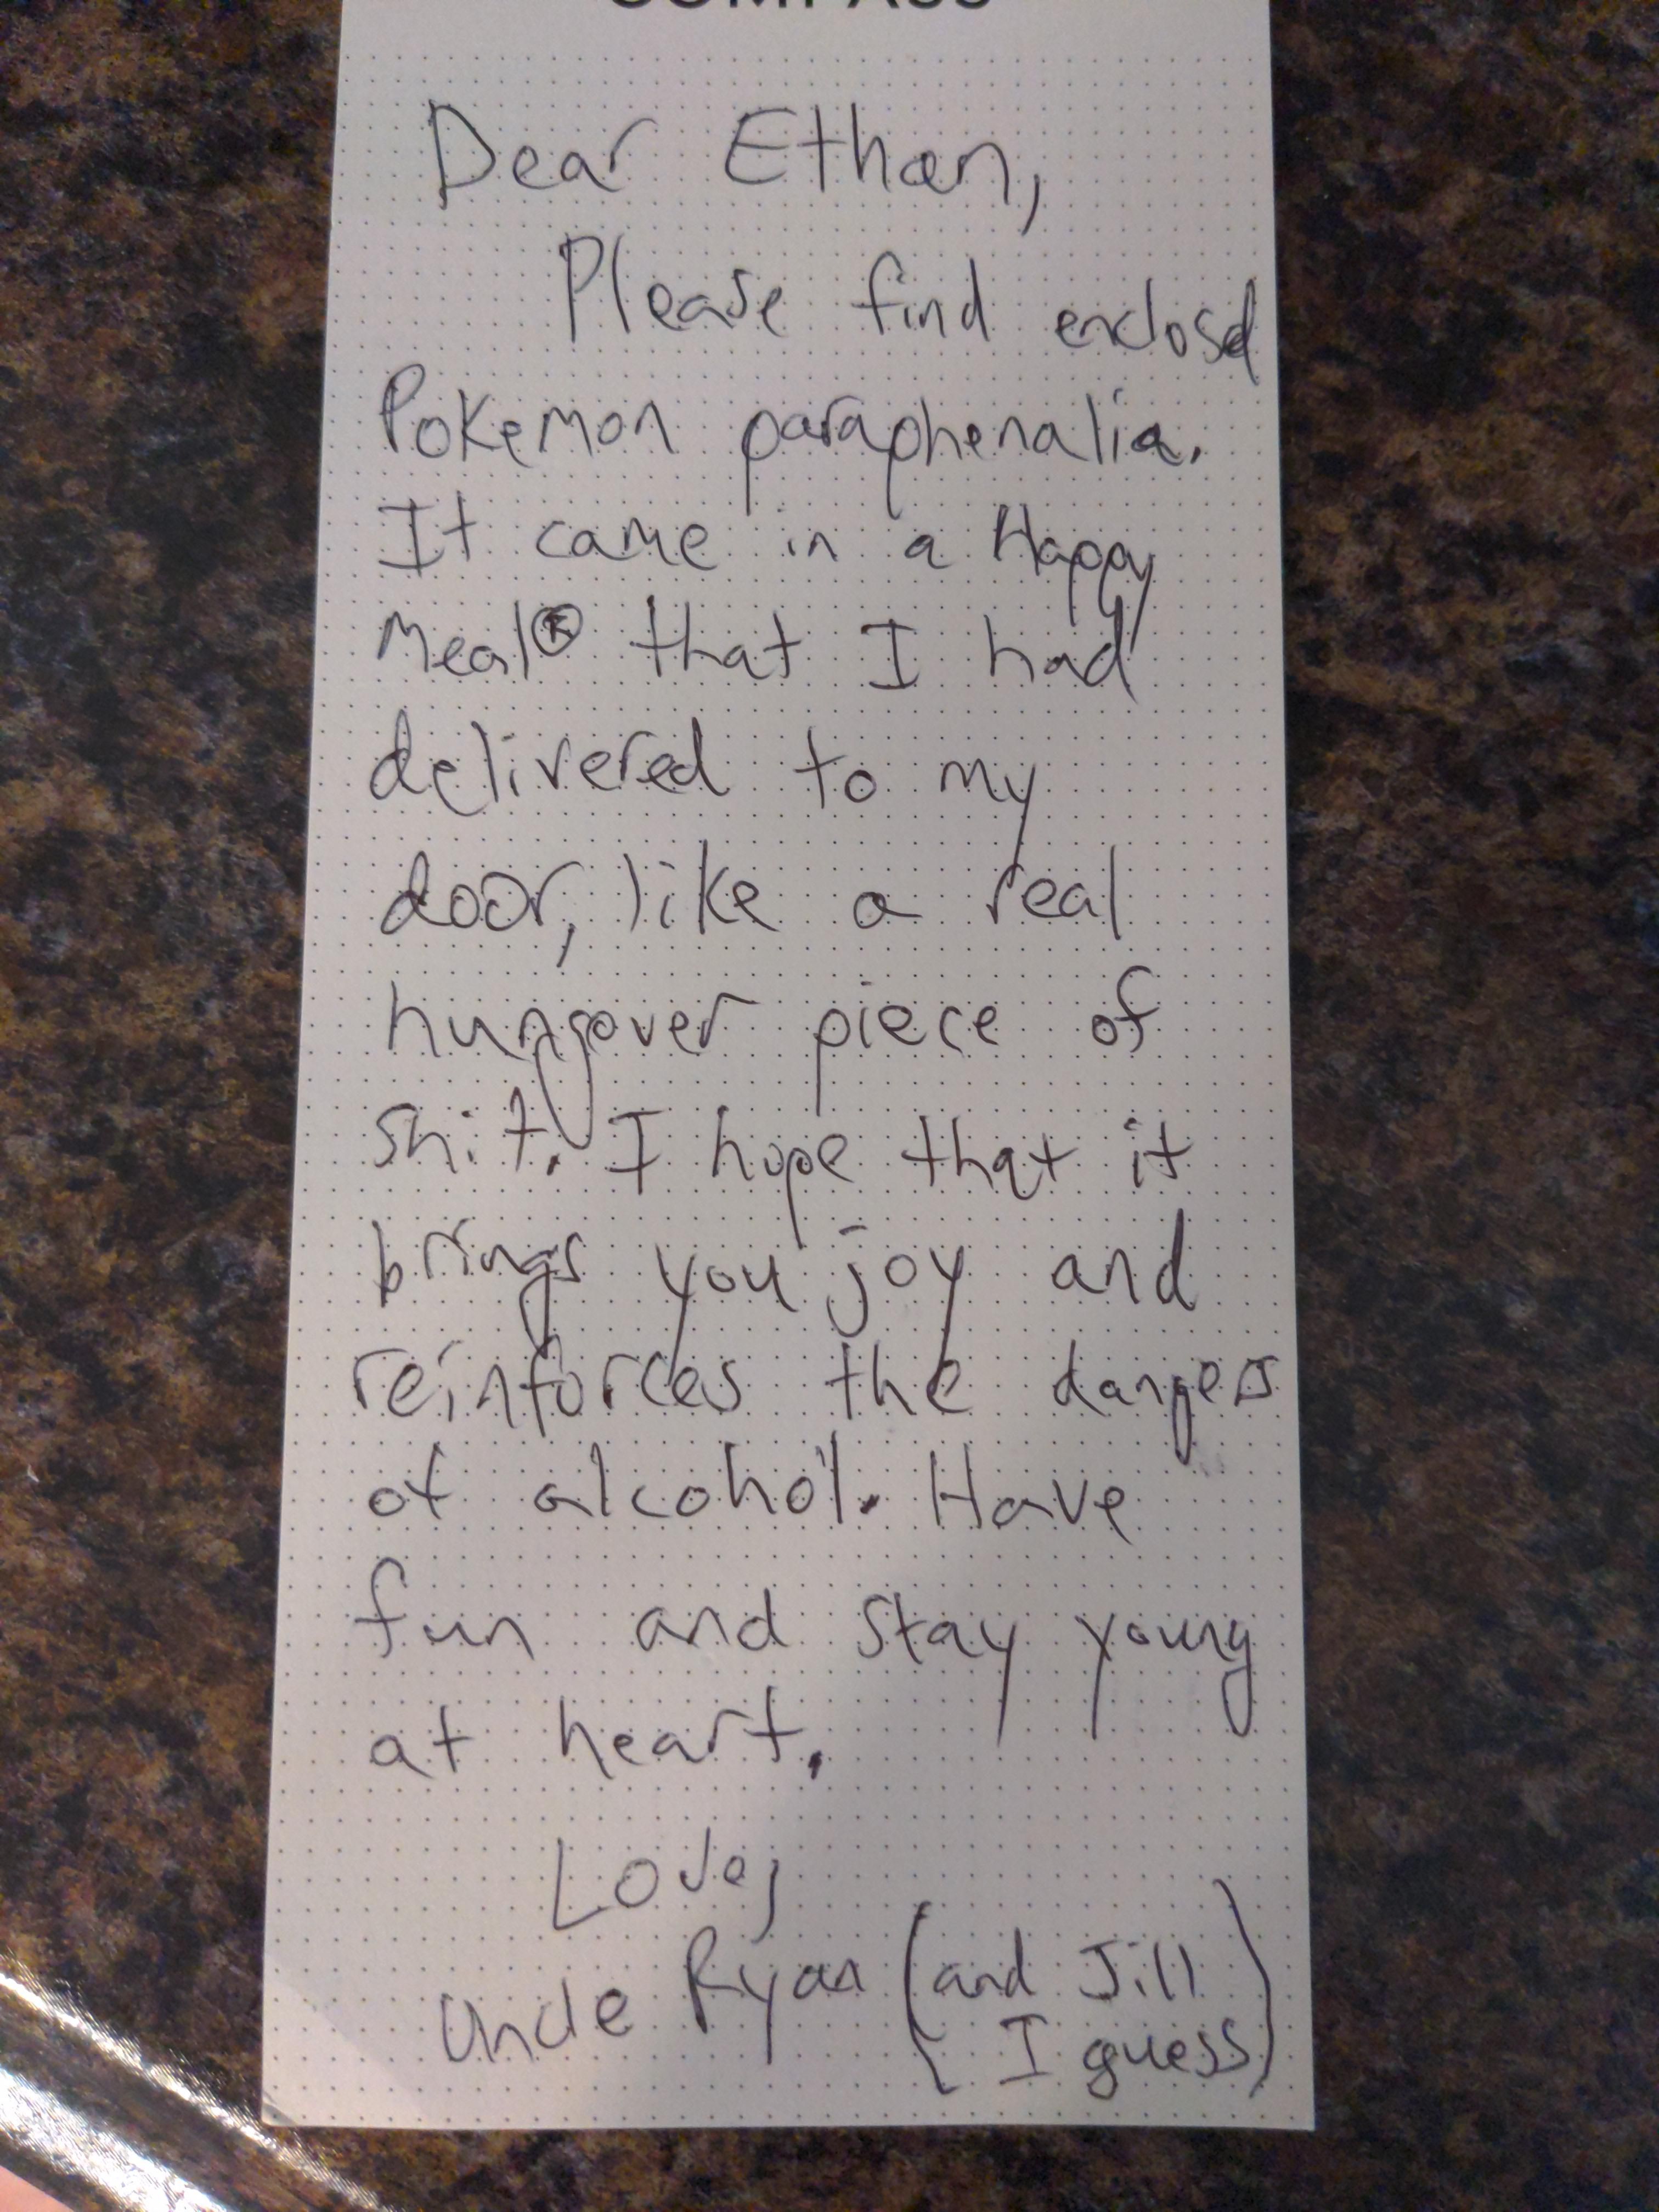 My hilarious brother in law in NY wrote my 3 year old son this note with the pokemon cards he sent him